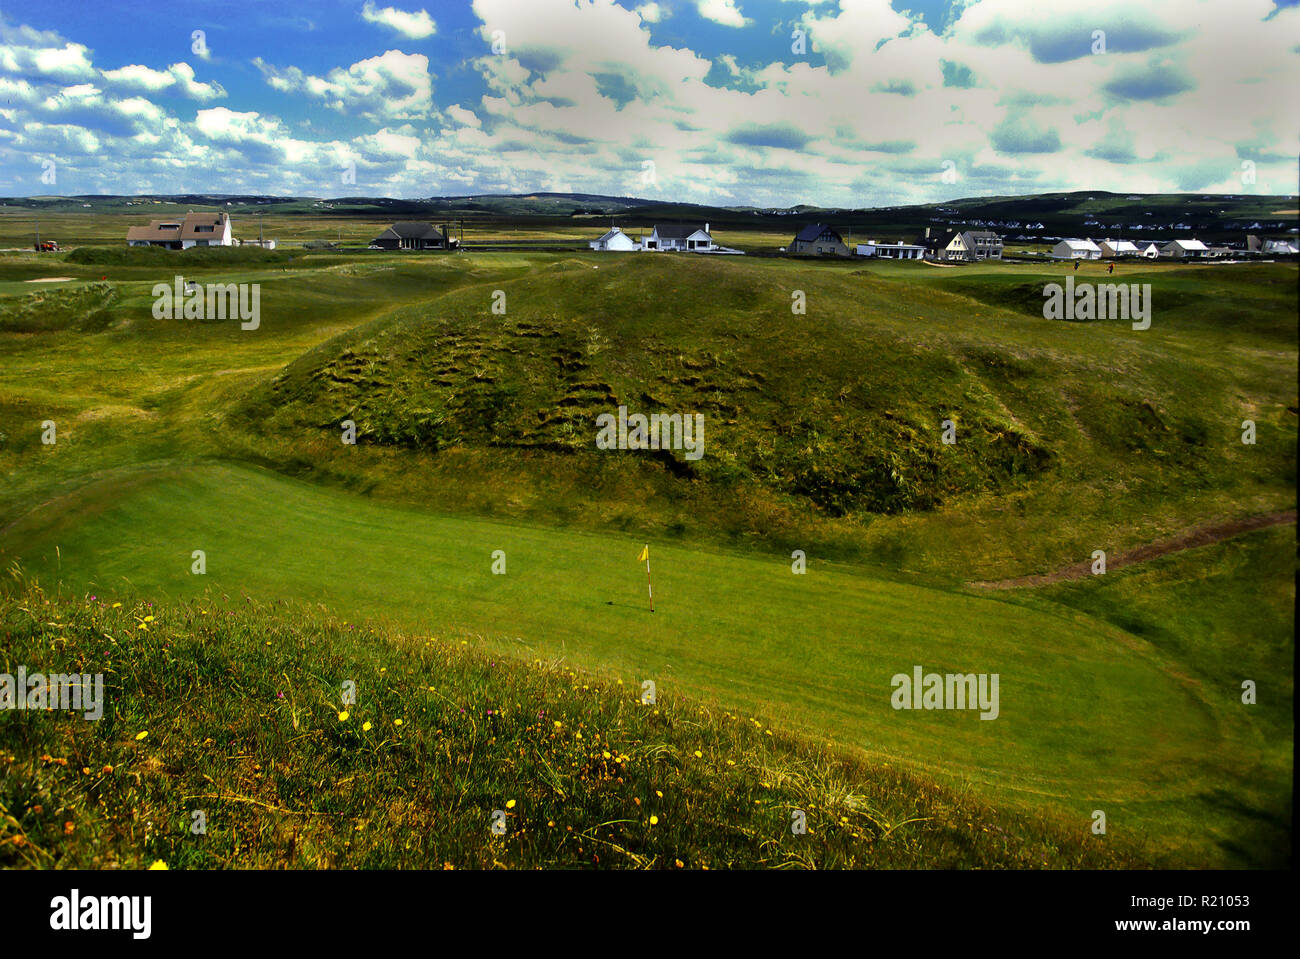 5th Hole a par three called The Dell, at Lahinch Golf Club, Ireland venue for the 2019 Irish Open on the PGA European Tour Stock Photo